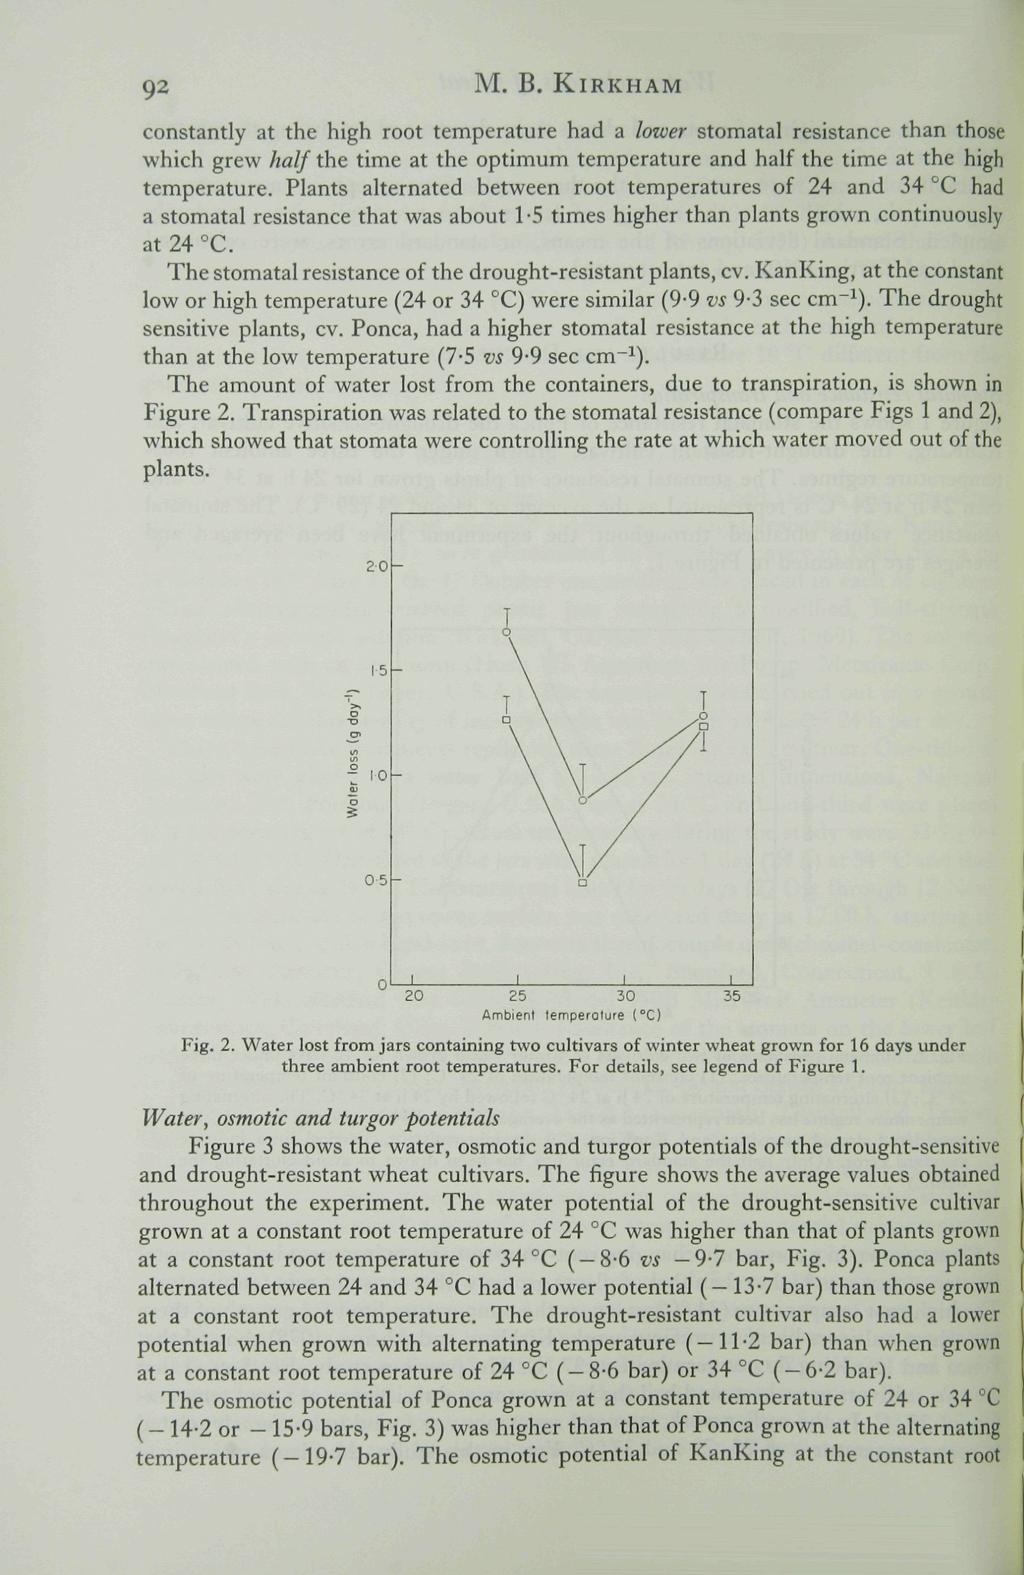 M. B, KIRKHAM constantly at the high root temperature had a lower stomatal resistance than those which grew half the time at the optimum temperature and half the time at the high temperature.